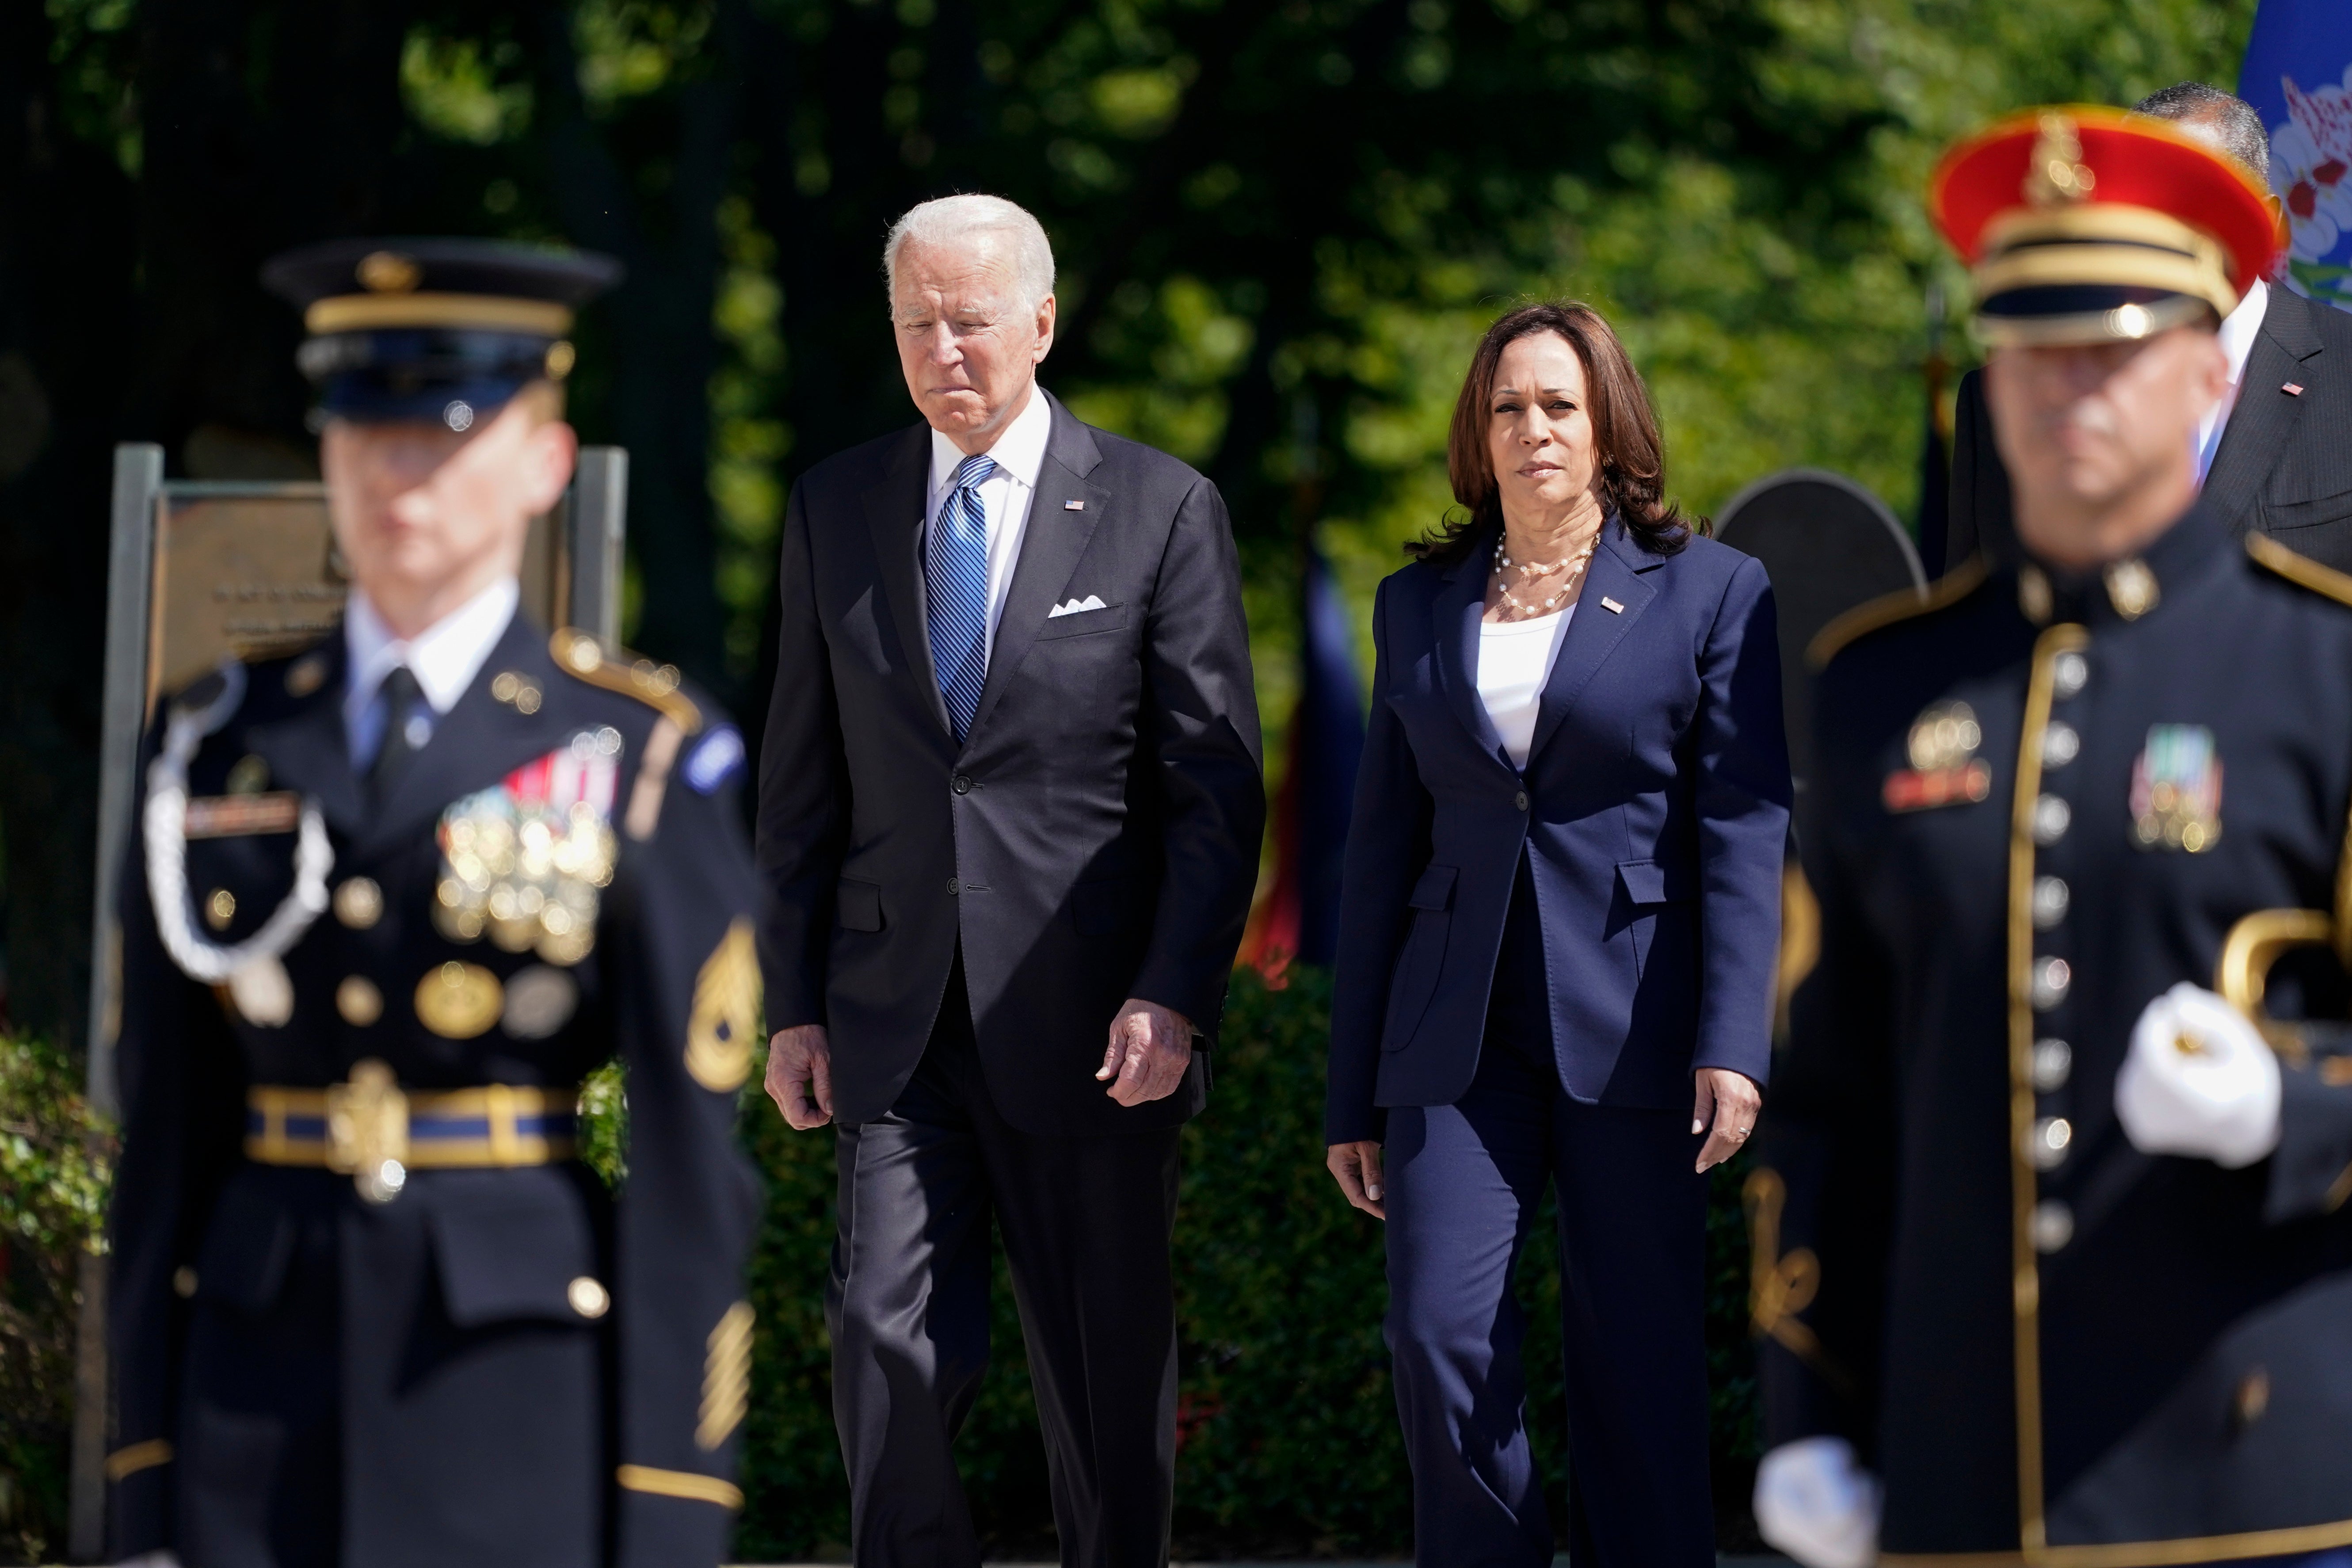 File image: President Joe Biden arrives with Vice President Kamala Harris to place a wreath at the Tomb of the Unknown Soldier at Arlington National Cemetery on Memorial Day, on 31 May, 2021